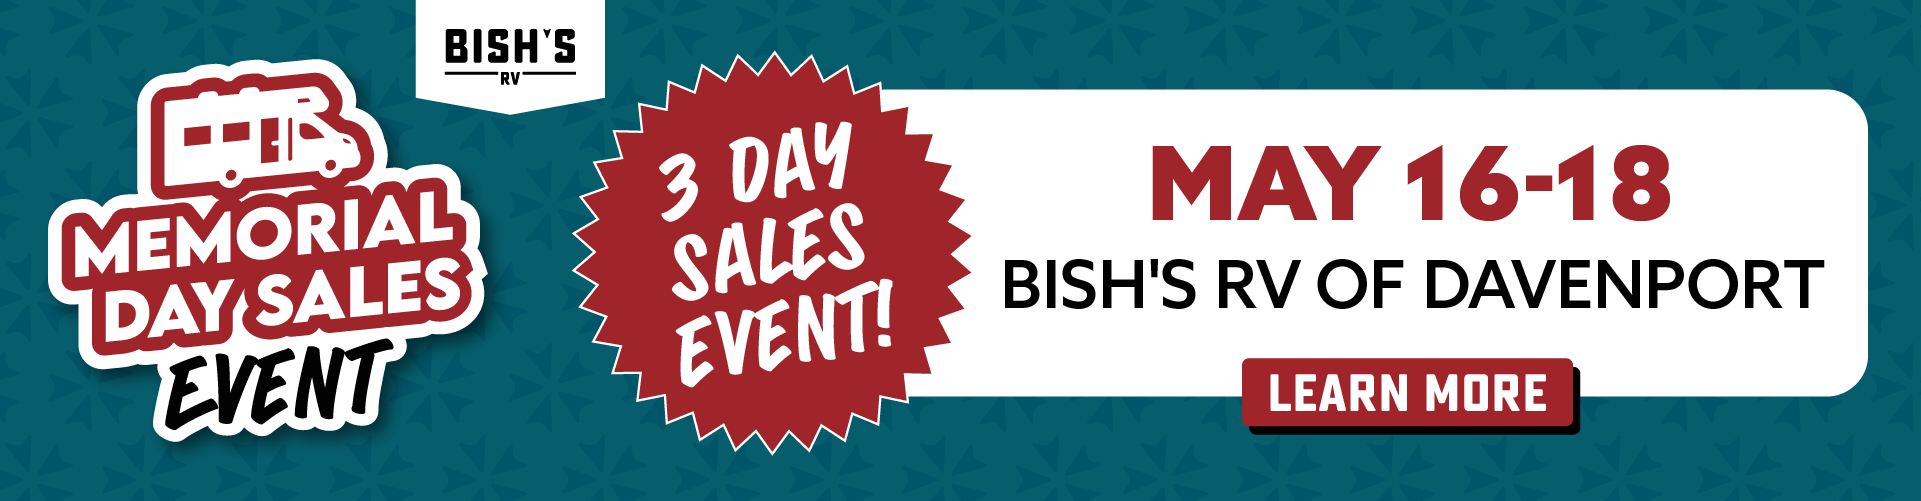 Memorial Day Sales Event - May 16-18, 2024 - Bish's RV of Davenport, IA